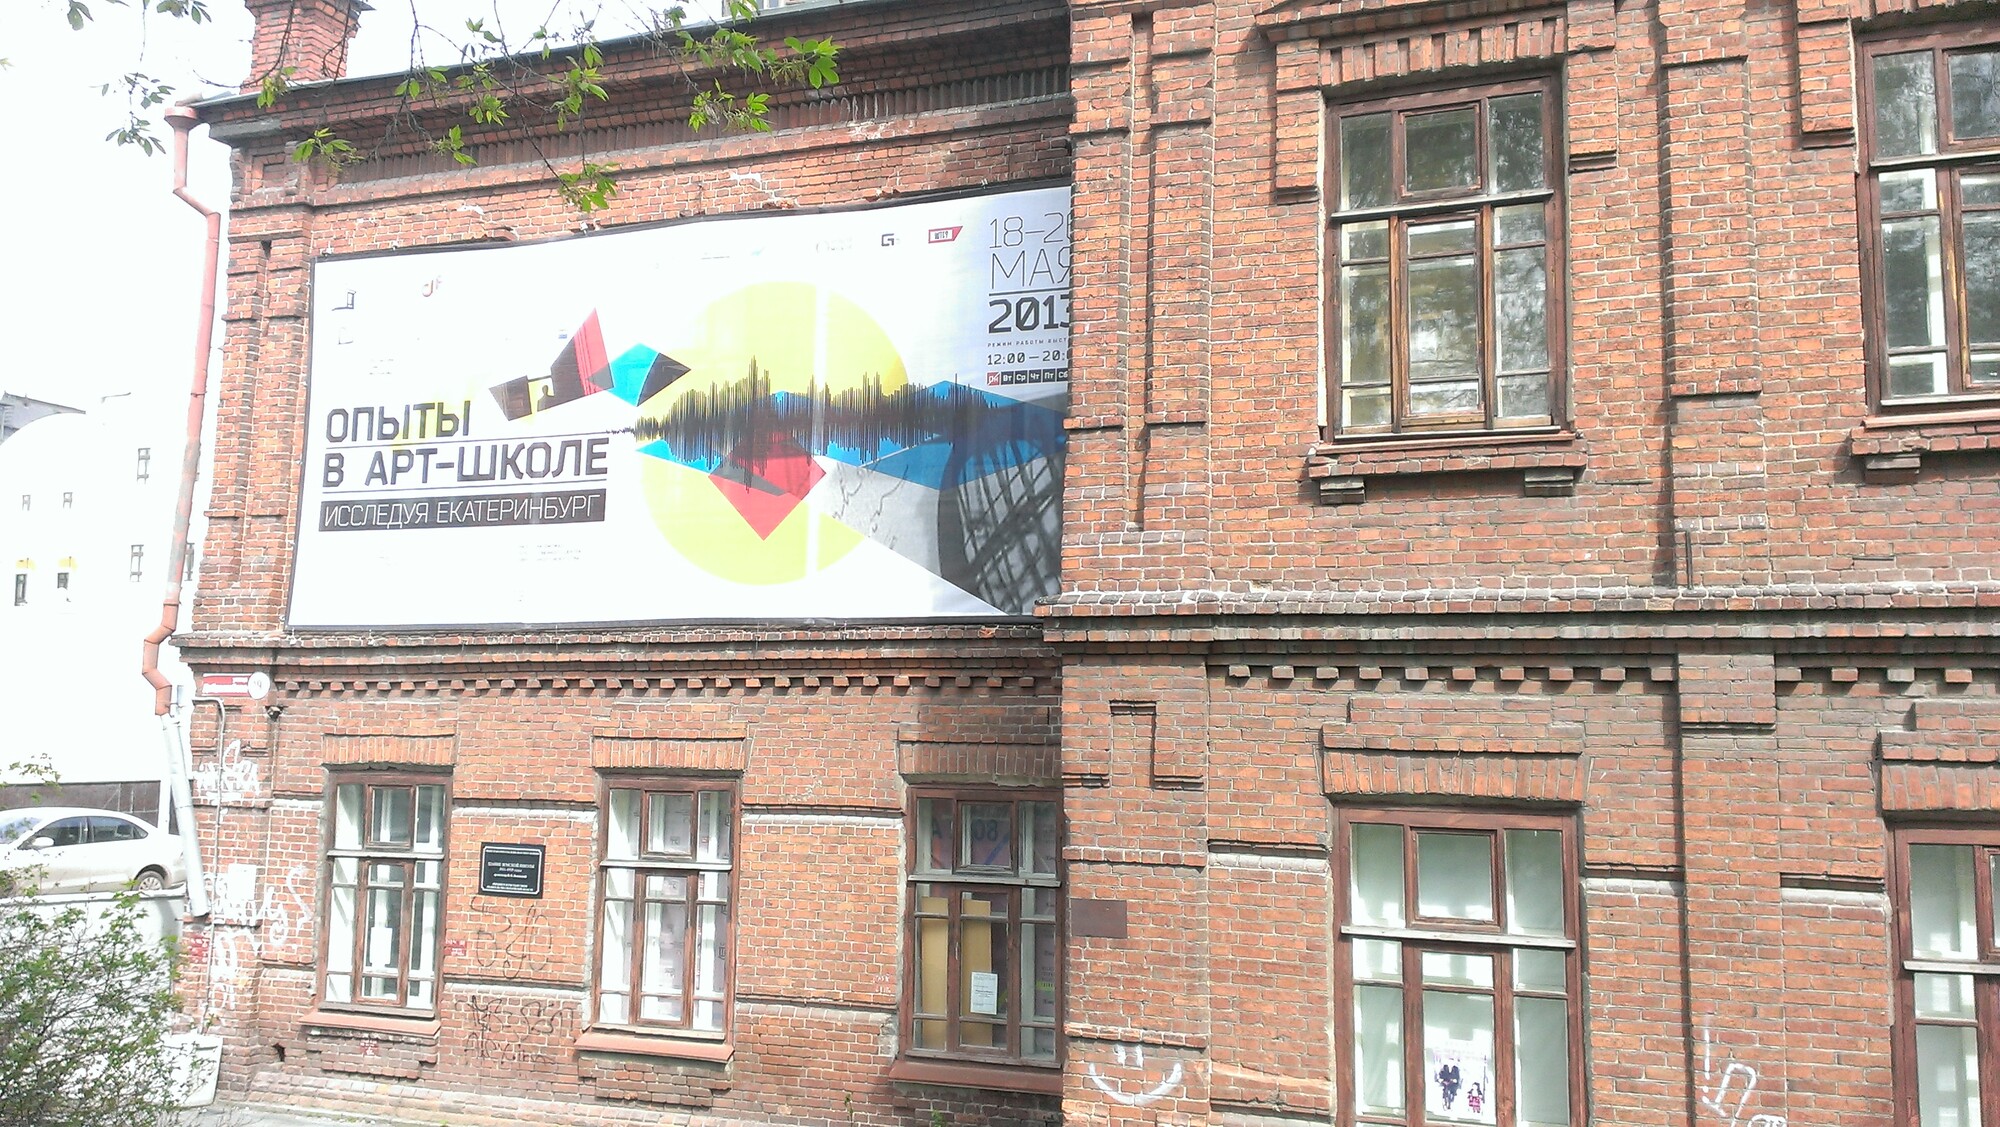 A billboard on the side of a brick building in Yekaterinburg.